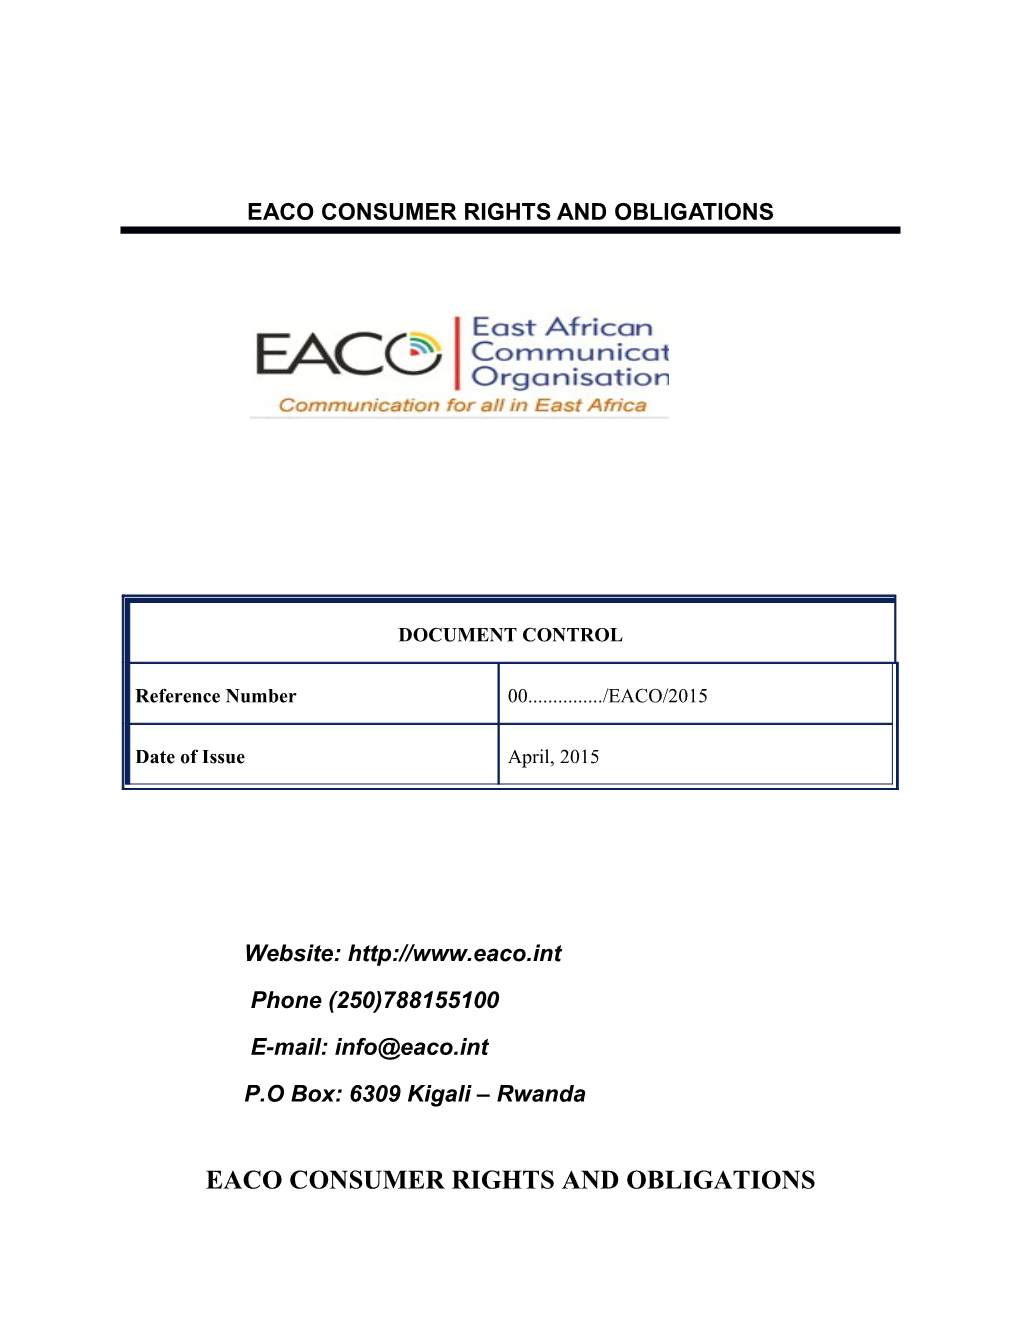 Eaco Consumer Rights and Obligations